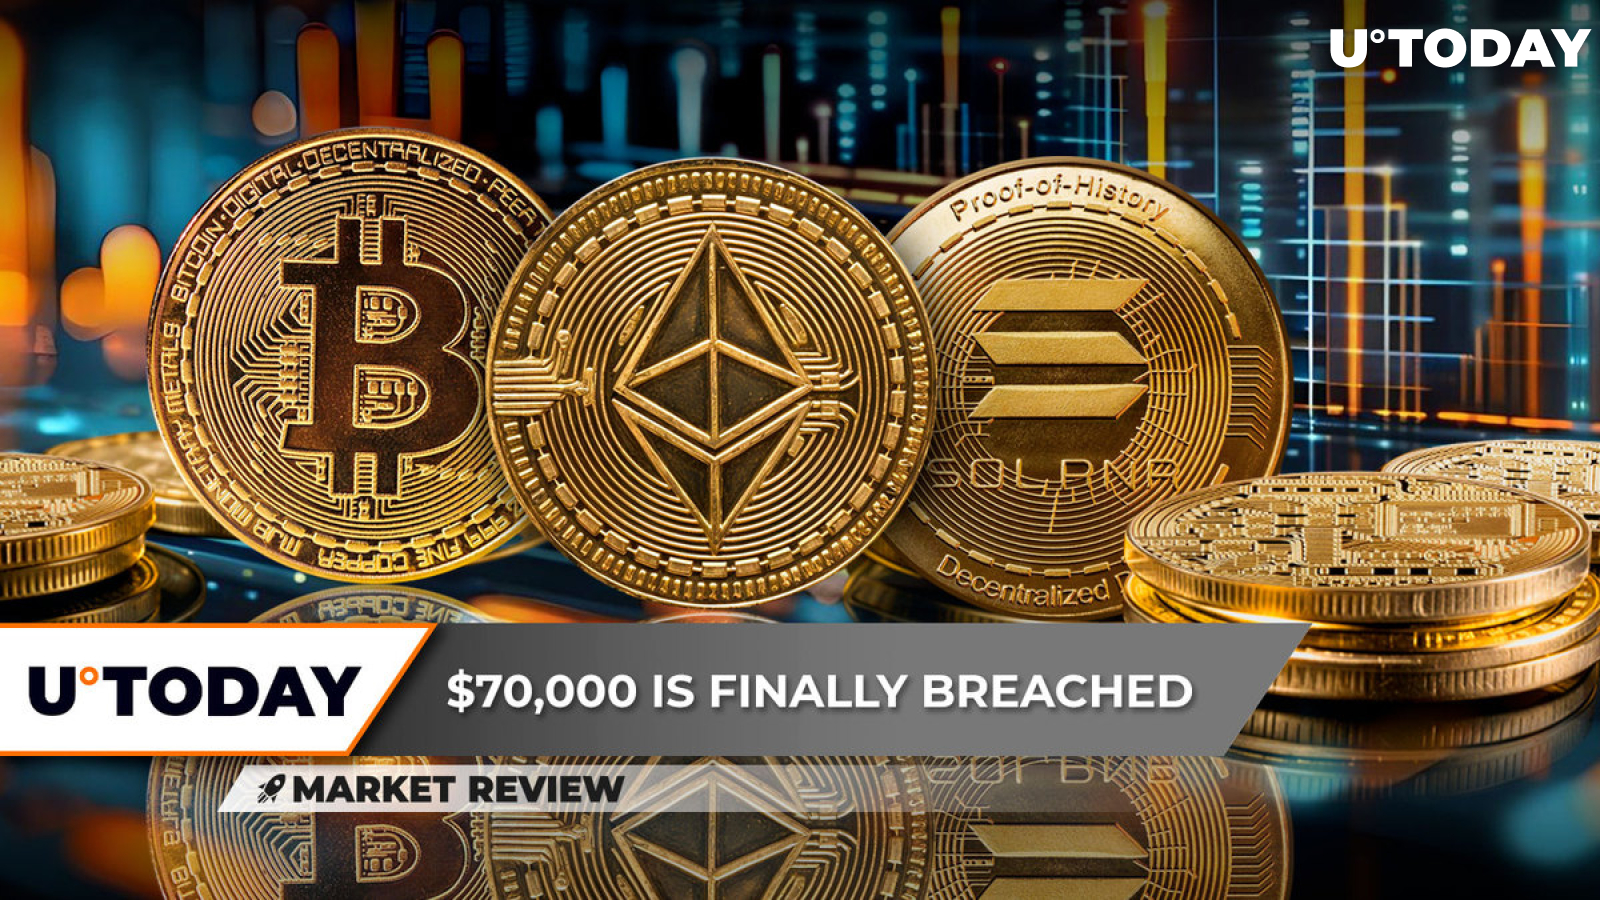 Bitcoin (BTC) on Verge of Hitting $71,000, Ethereum (ETH) Shows Bizarre Activity, Will Solana (SOL) Become Number 1 Again?